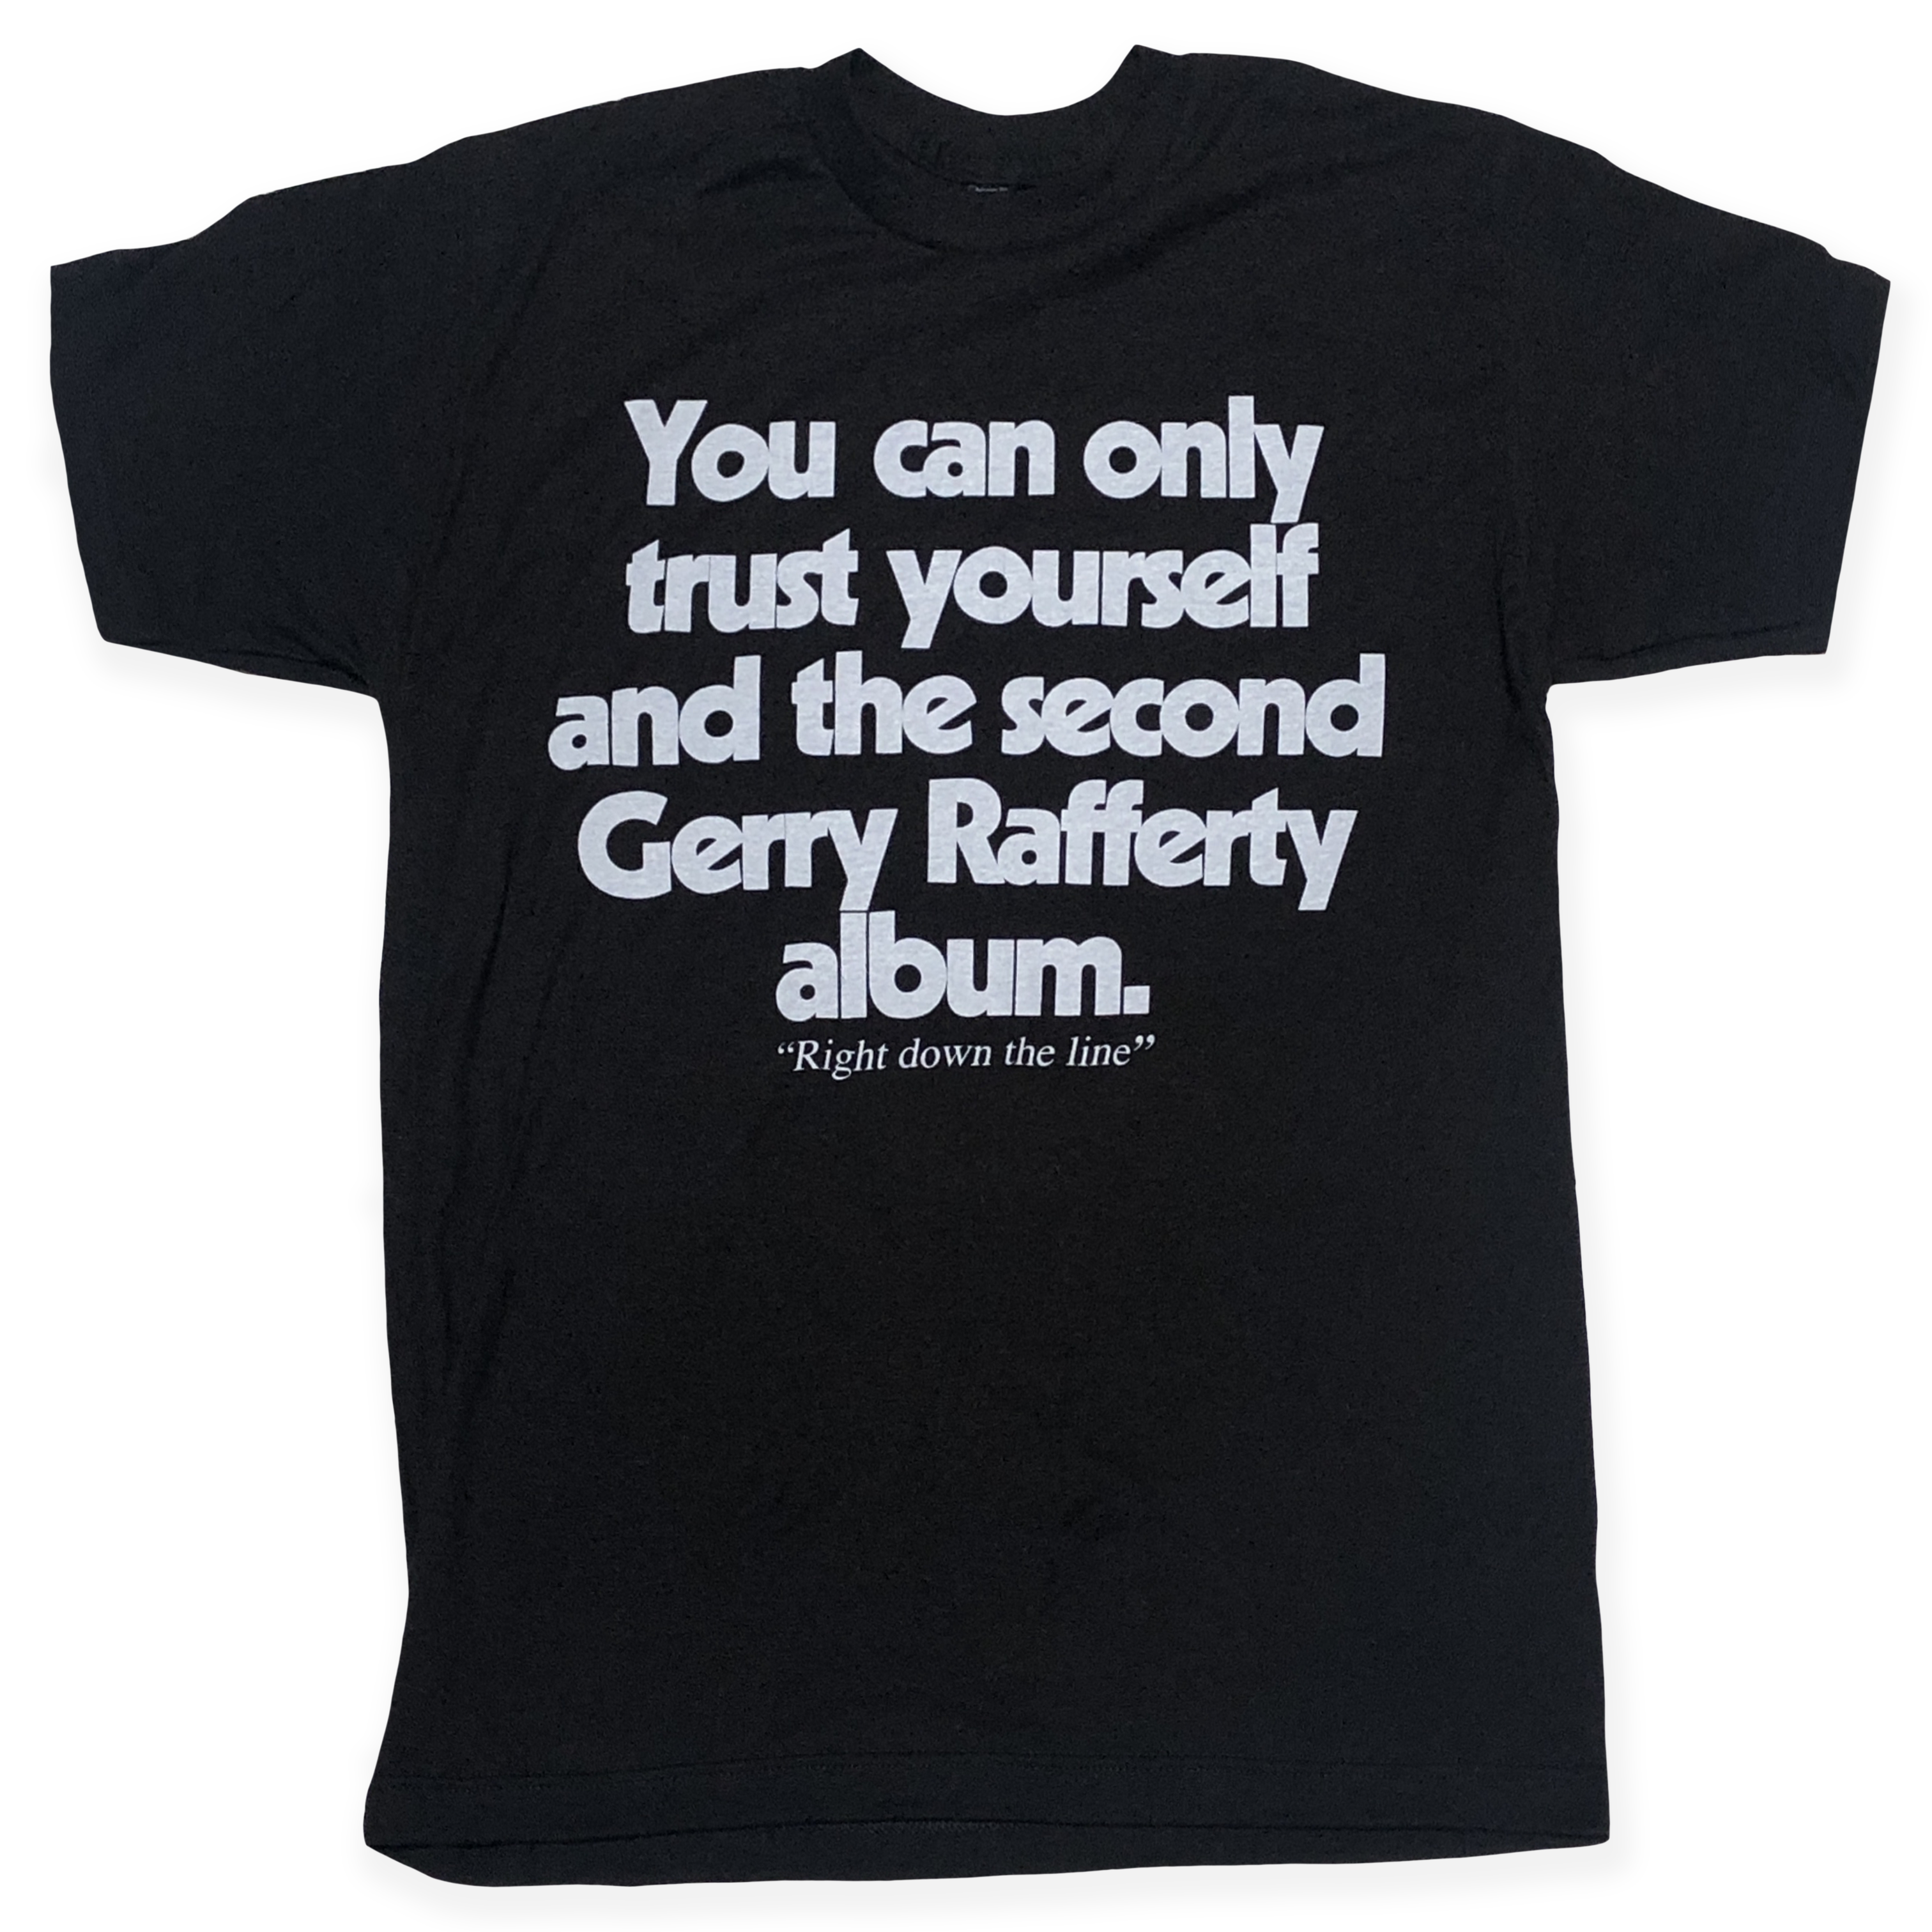 Gerry Rafferty Right Down the Line T-Shirt – Feels So Good